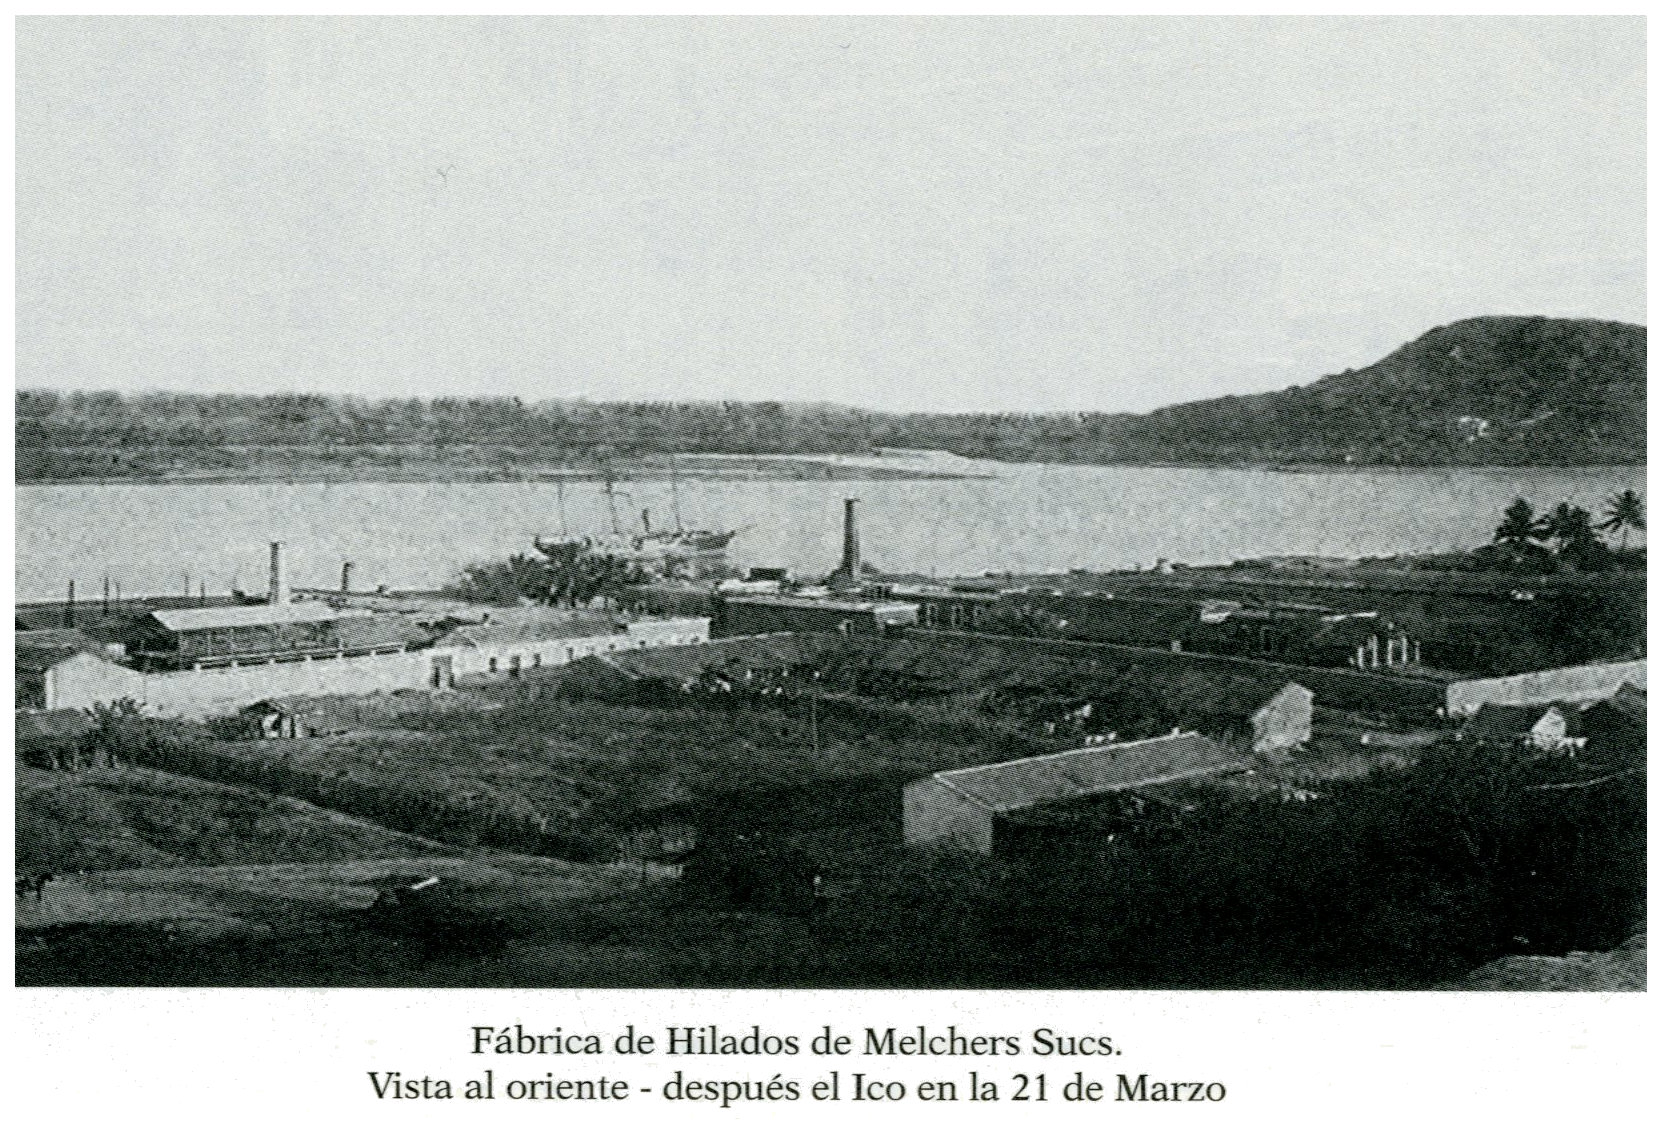 Melchers Sucesores factory